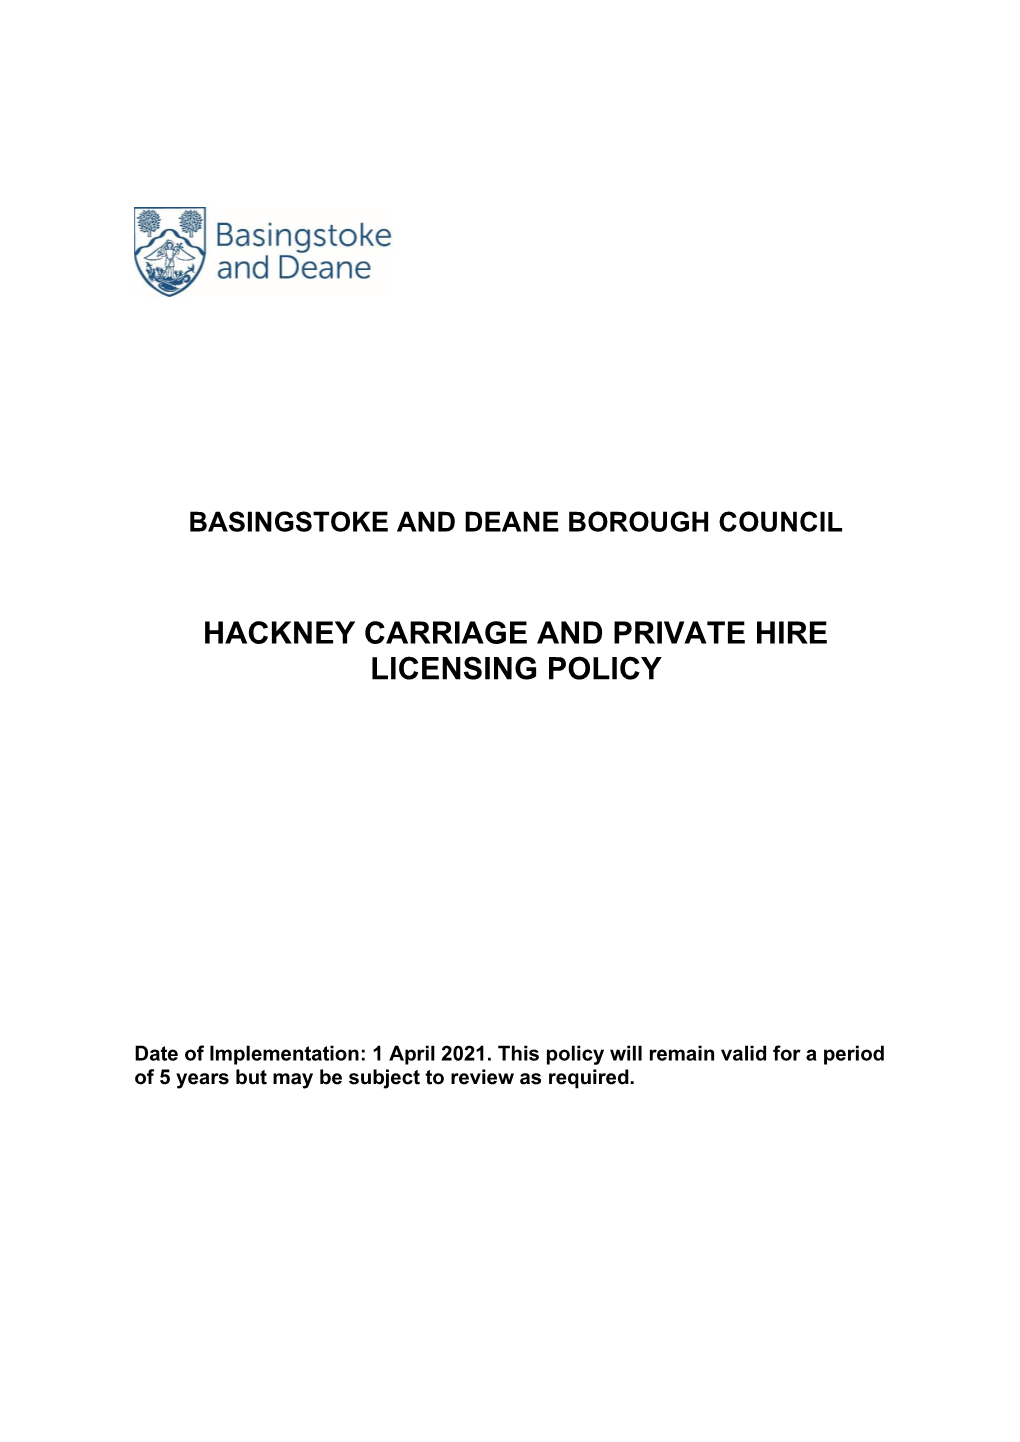 Hackney Carriage and Private Hire Policy 2021(PDF)